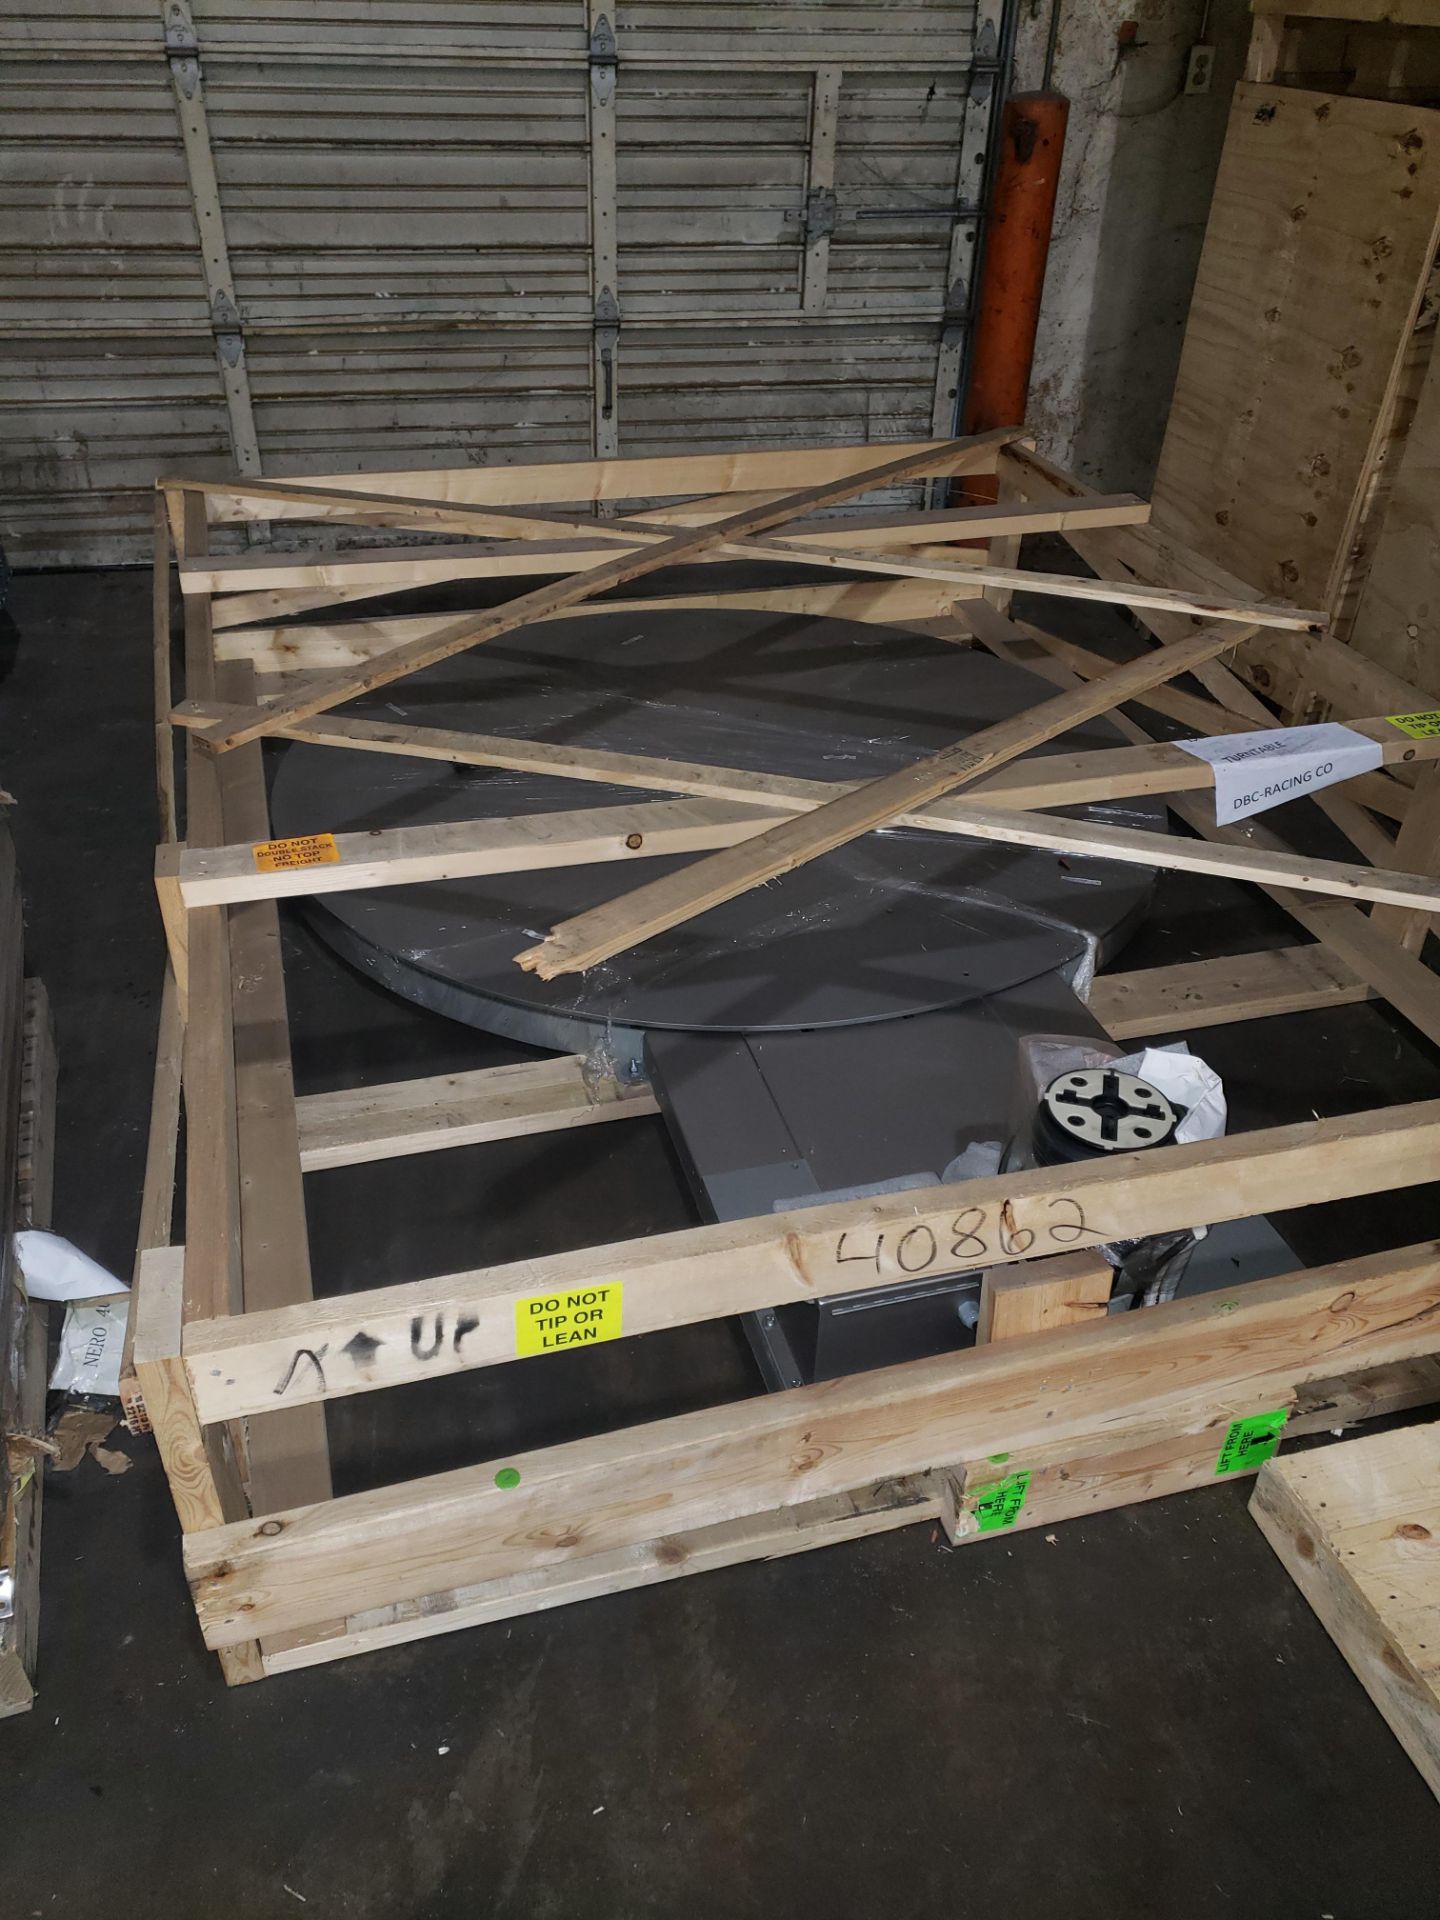 Pallet Turntable Wrapper - As New - Never Installed (SOLD AS IS WHERE IS) (Loading Fee $100) (